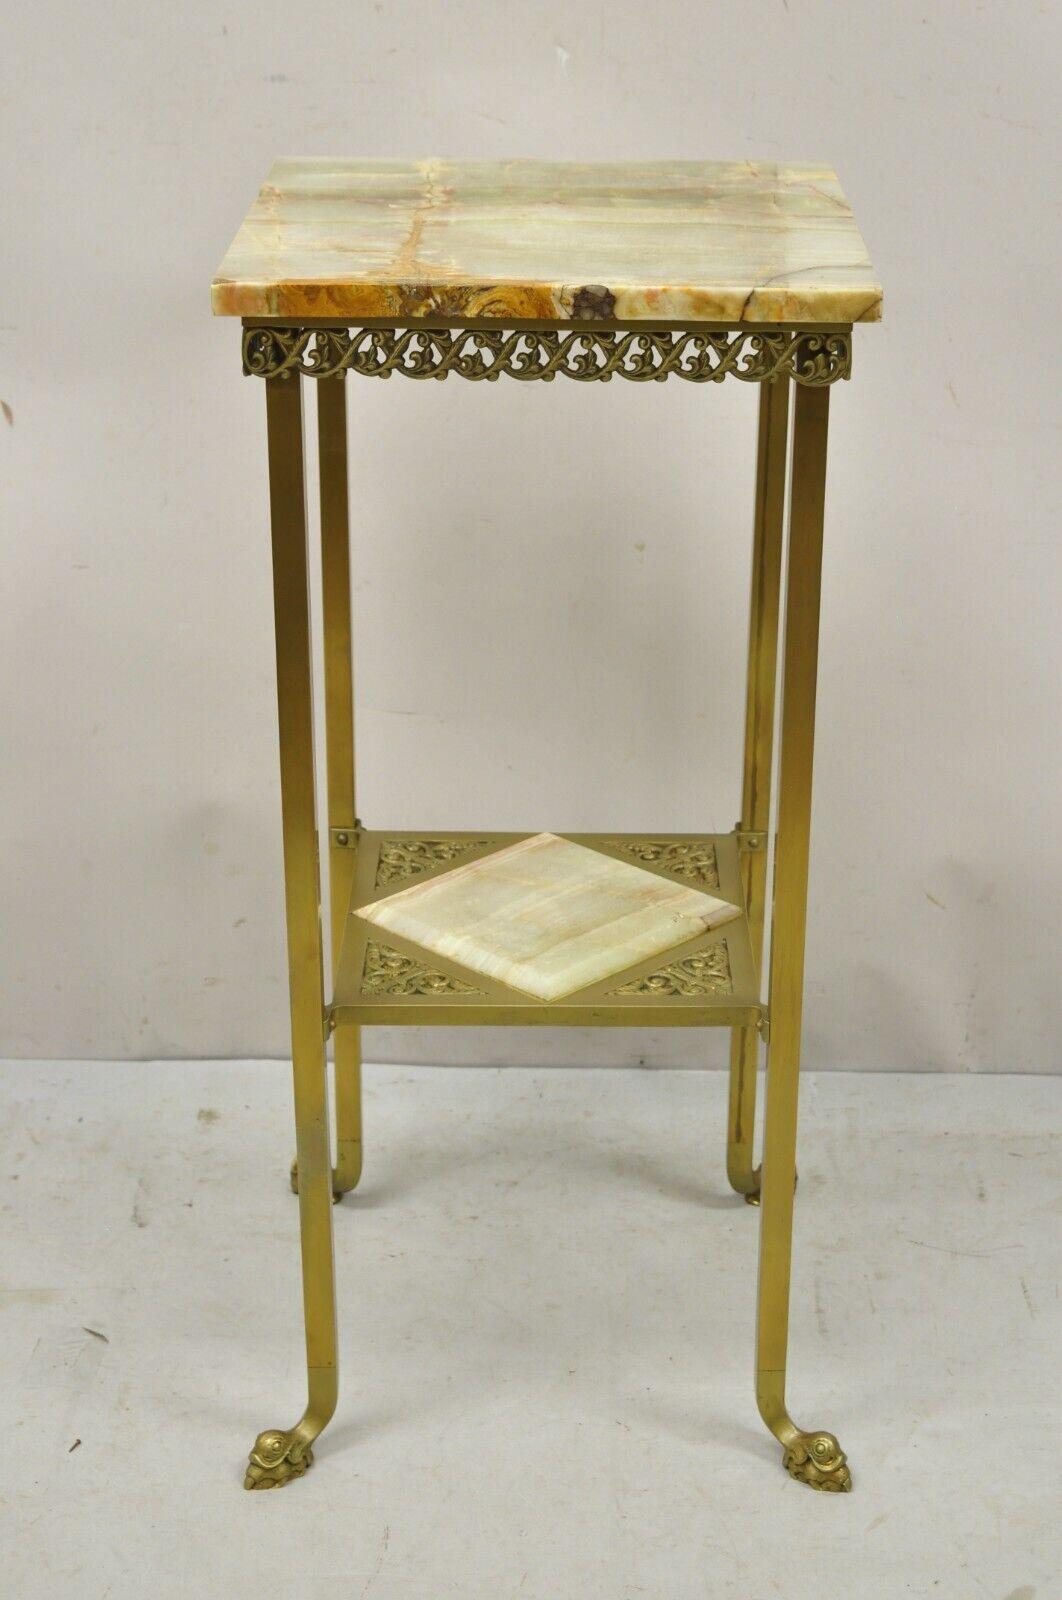 Antique brass two tier onyx stone dolphin feet plant stand side table. Item features dolphin feet, brass 2 tier base, two onyx stone surfaces, scrollwork skirt, very nice antique item, great style and form. Circa 19th Century. Measurements: 30.25